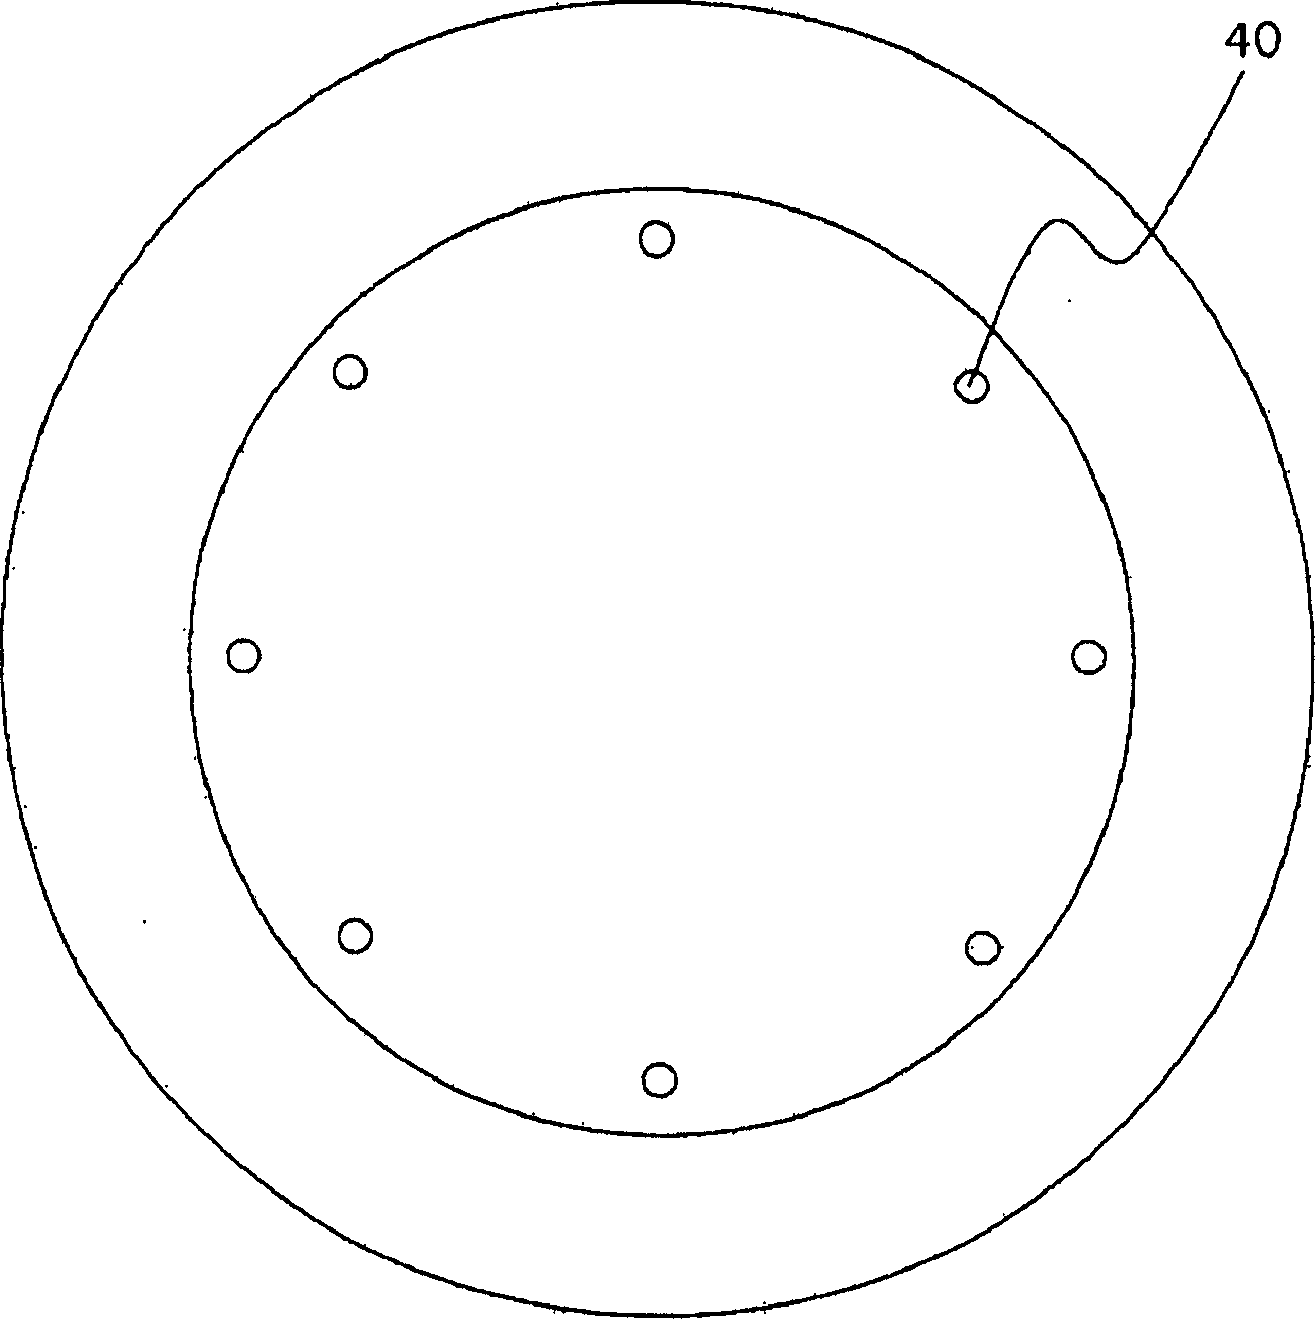 Electro-static chuck with non-sintered aln and a method of preparing the same